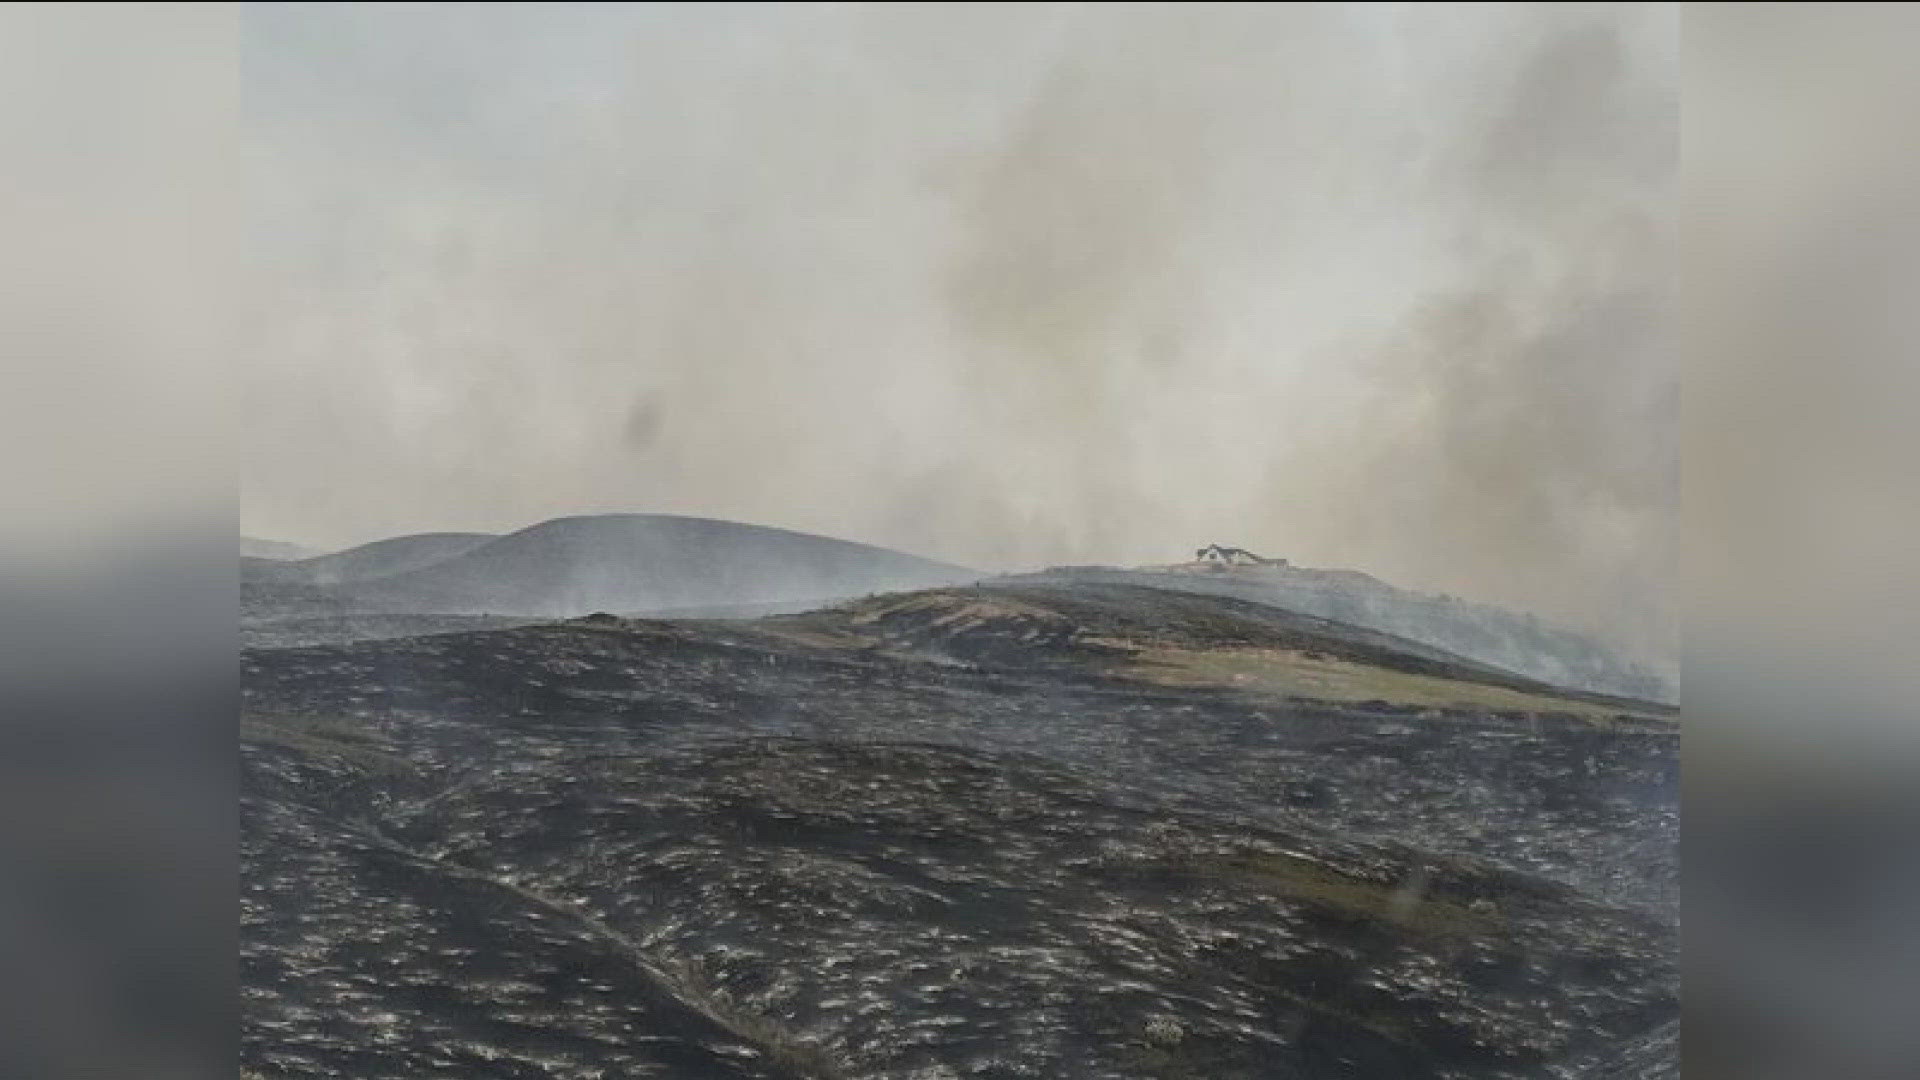 Gem County Fire on Monday said the 443-acre fire on June 21 was caused by a "swather striking a rock." No structures were lost from the fire.